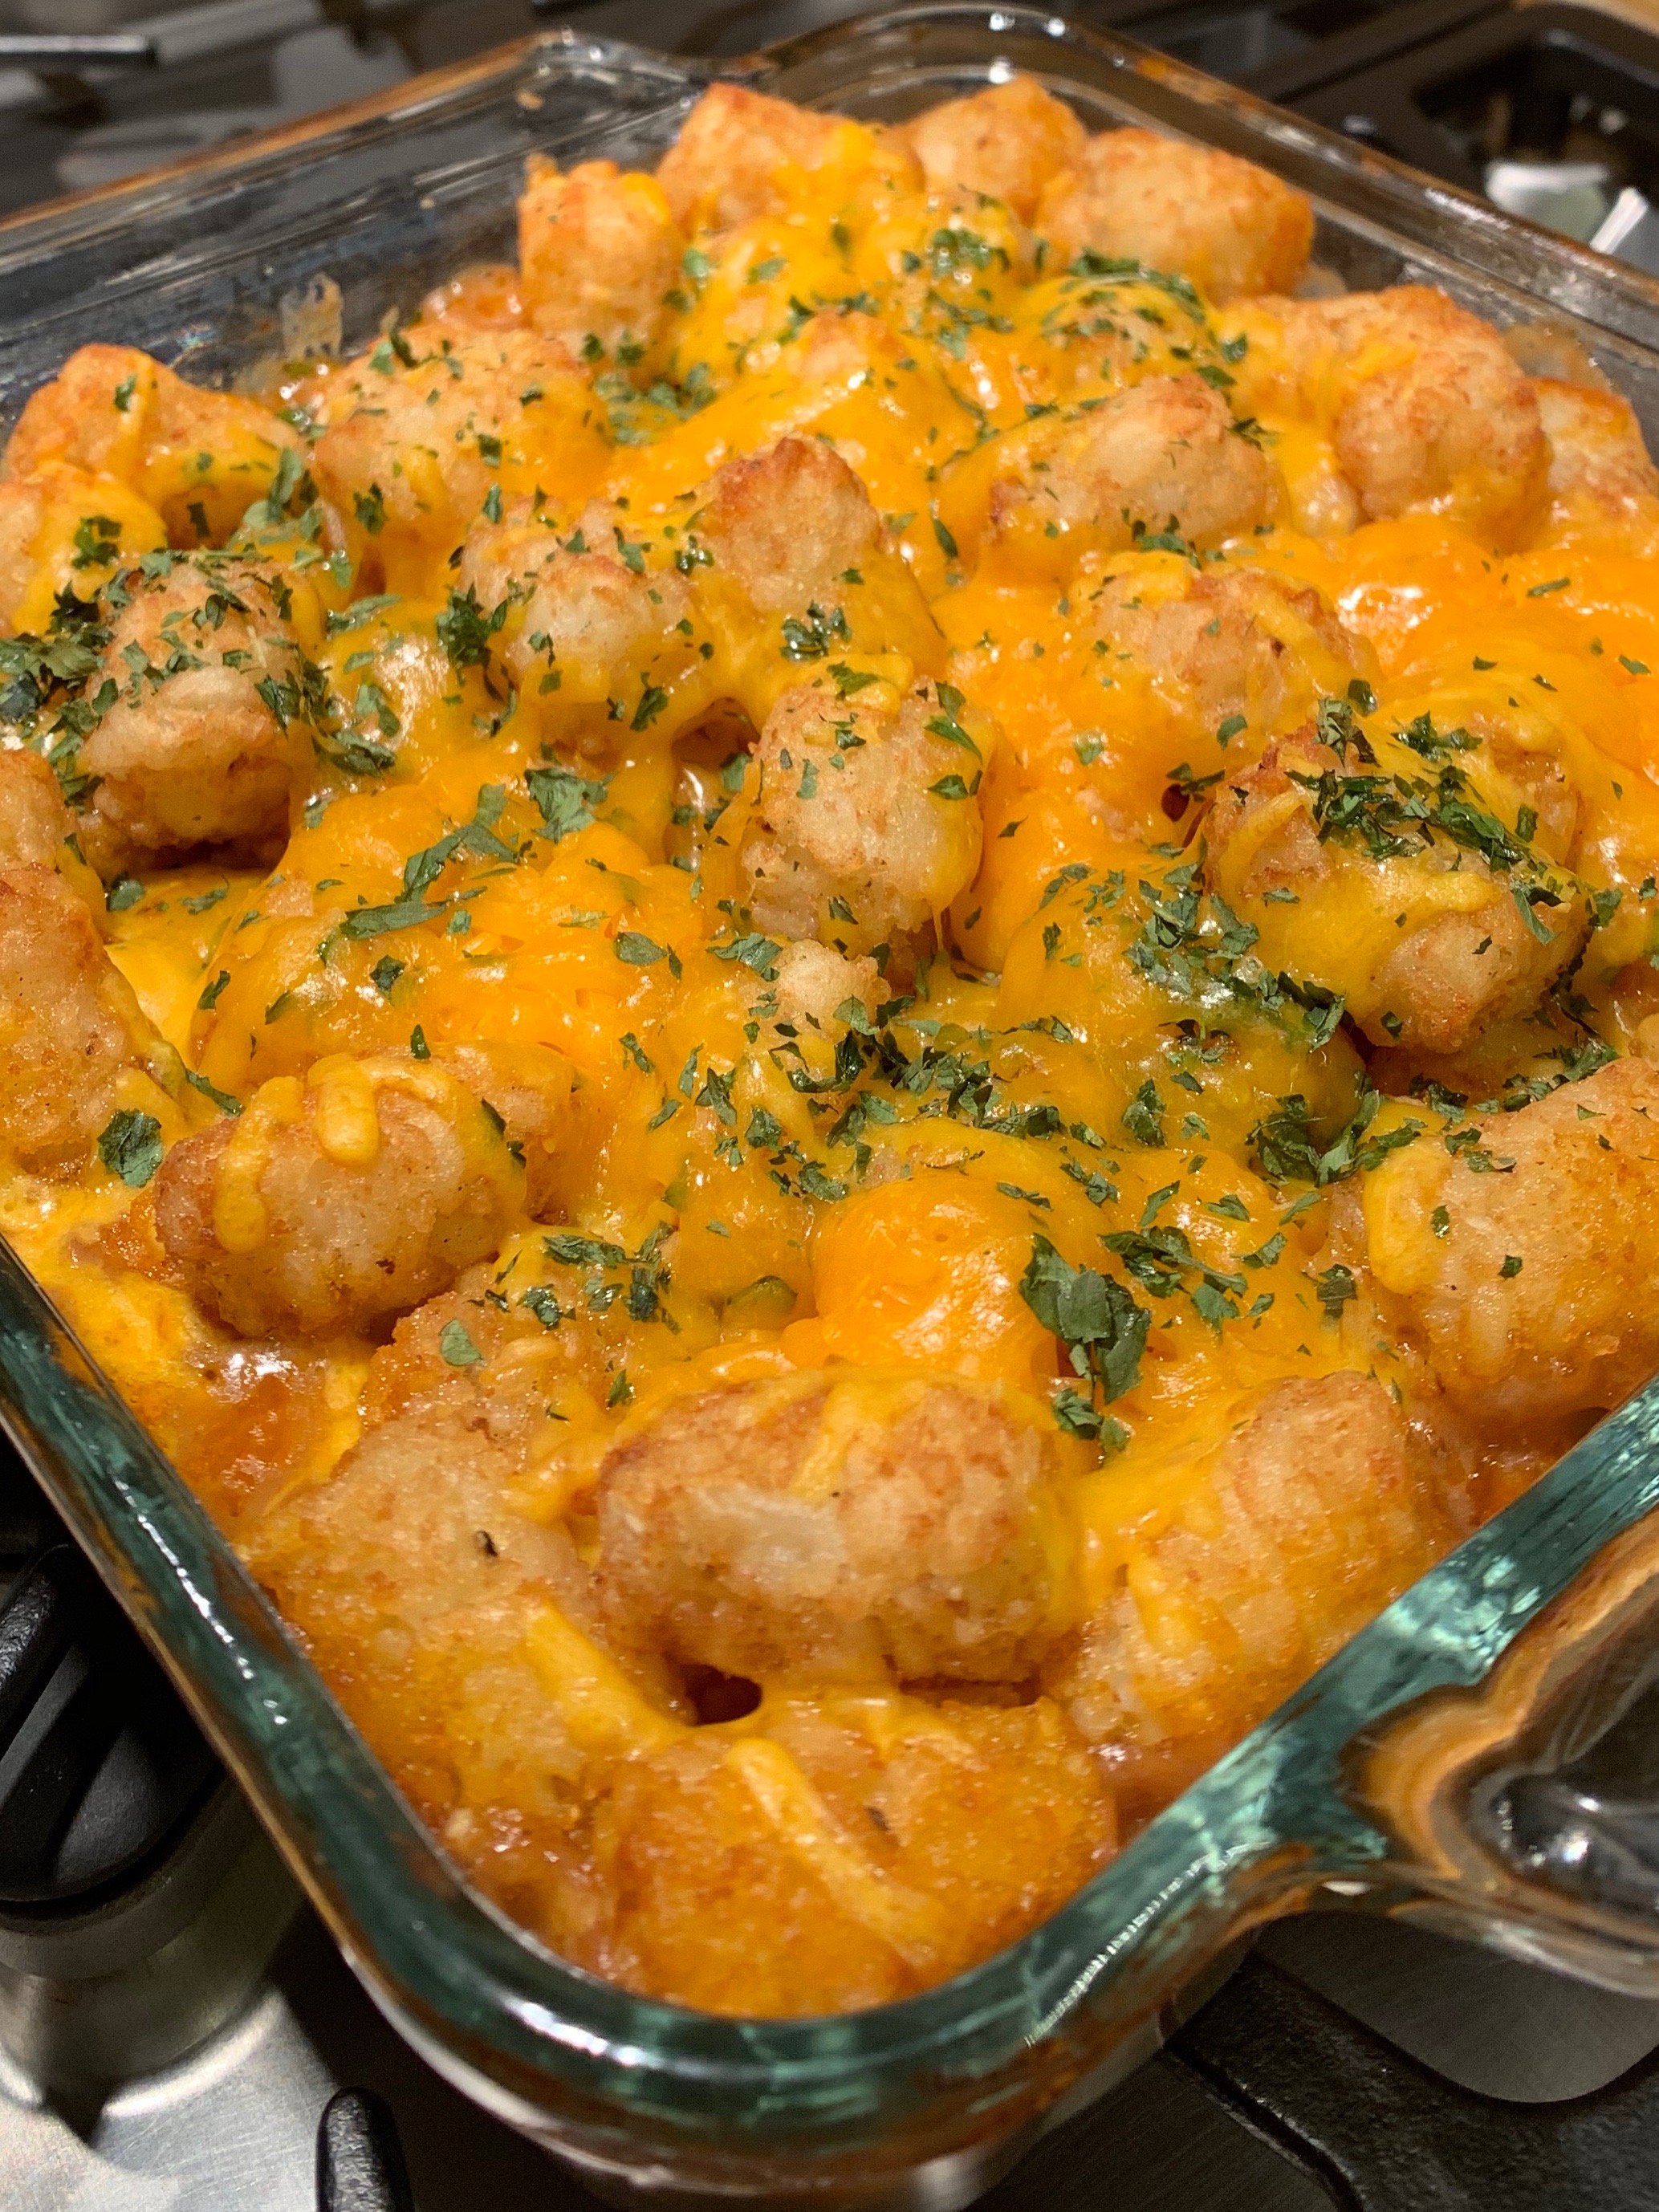 Campbell's Tater Tot Casserole 